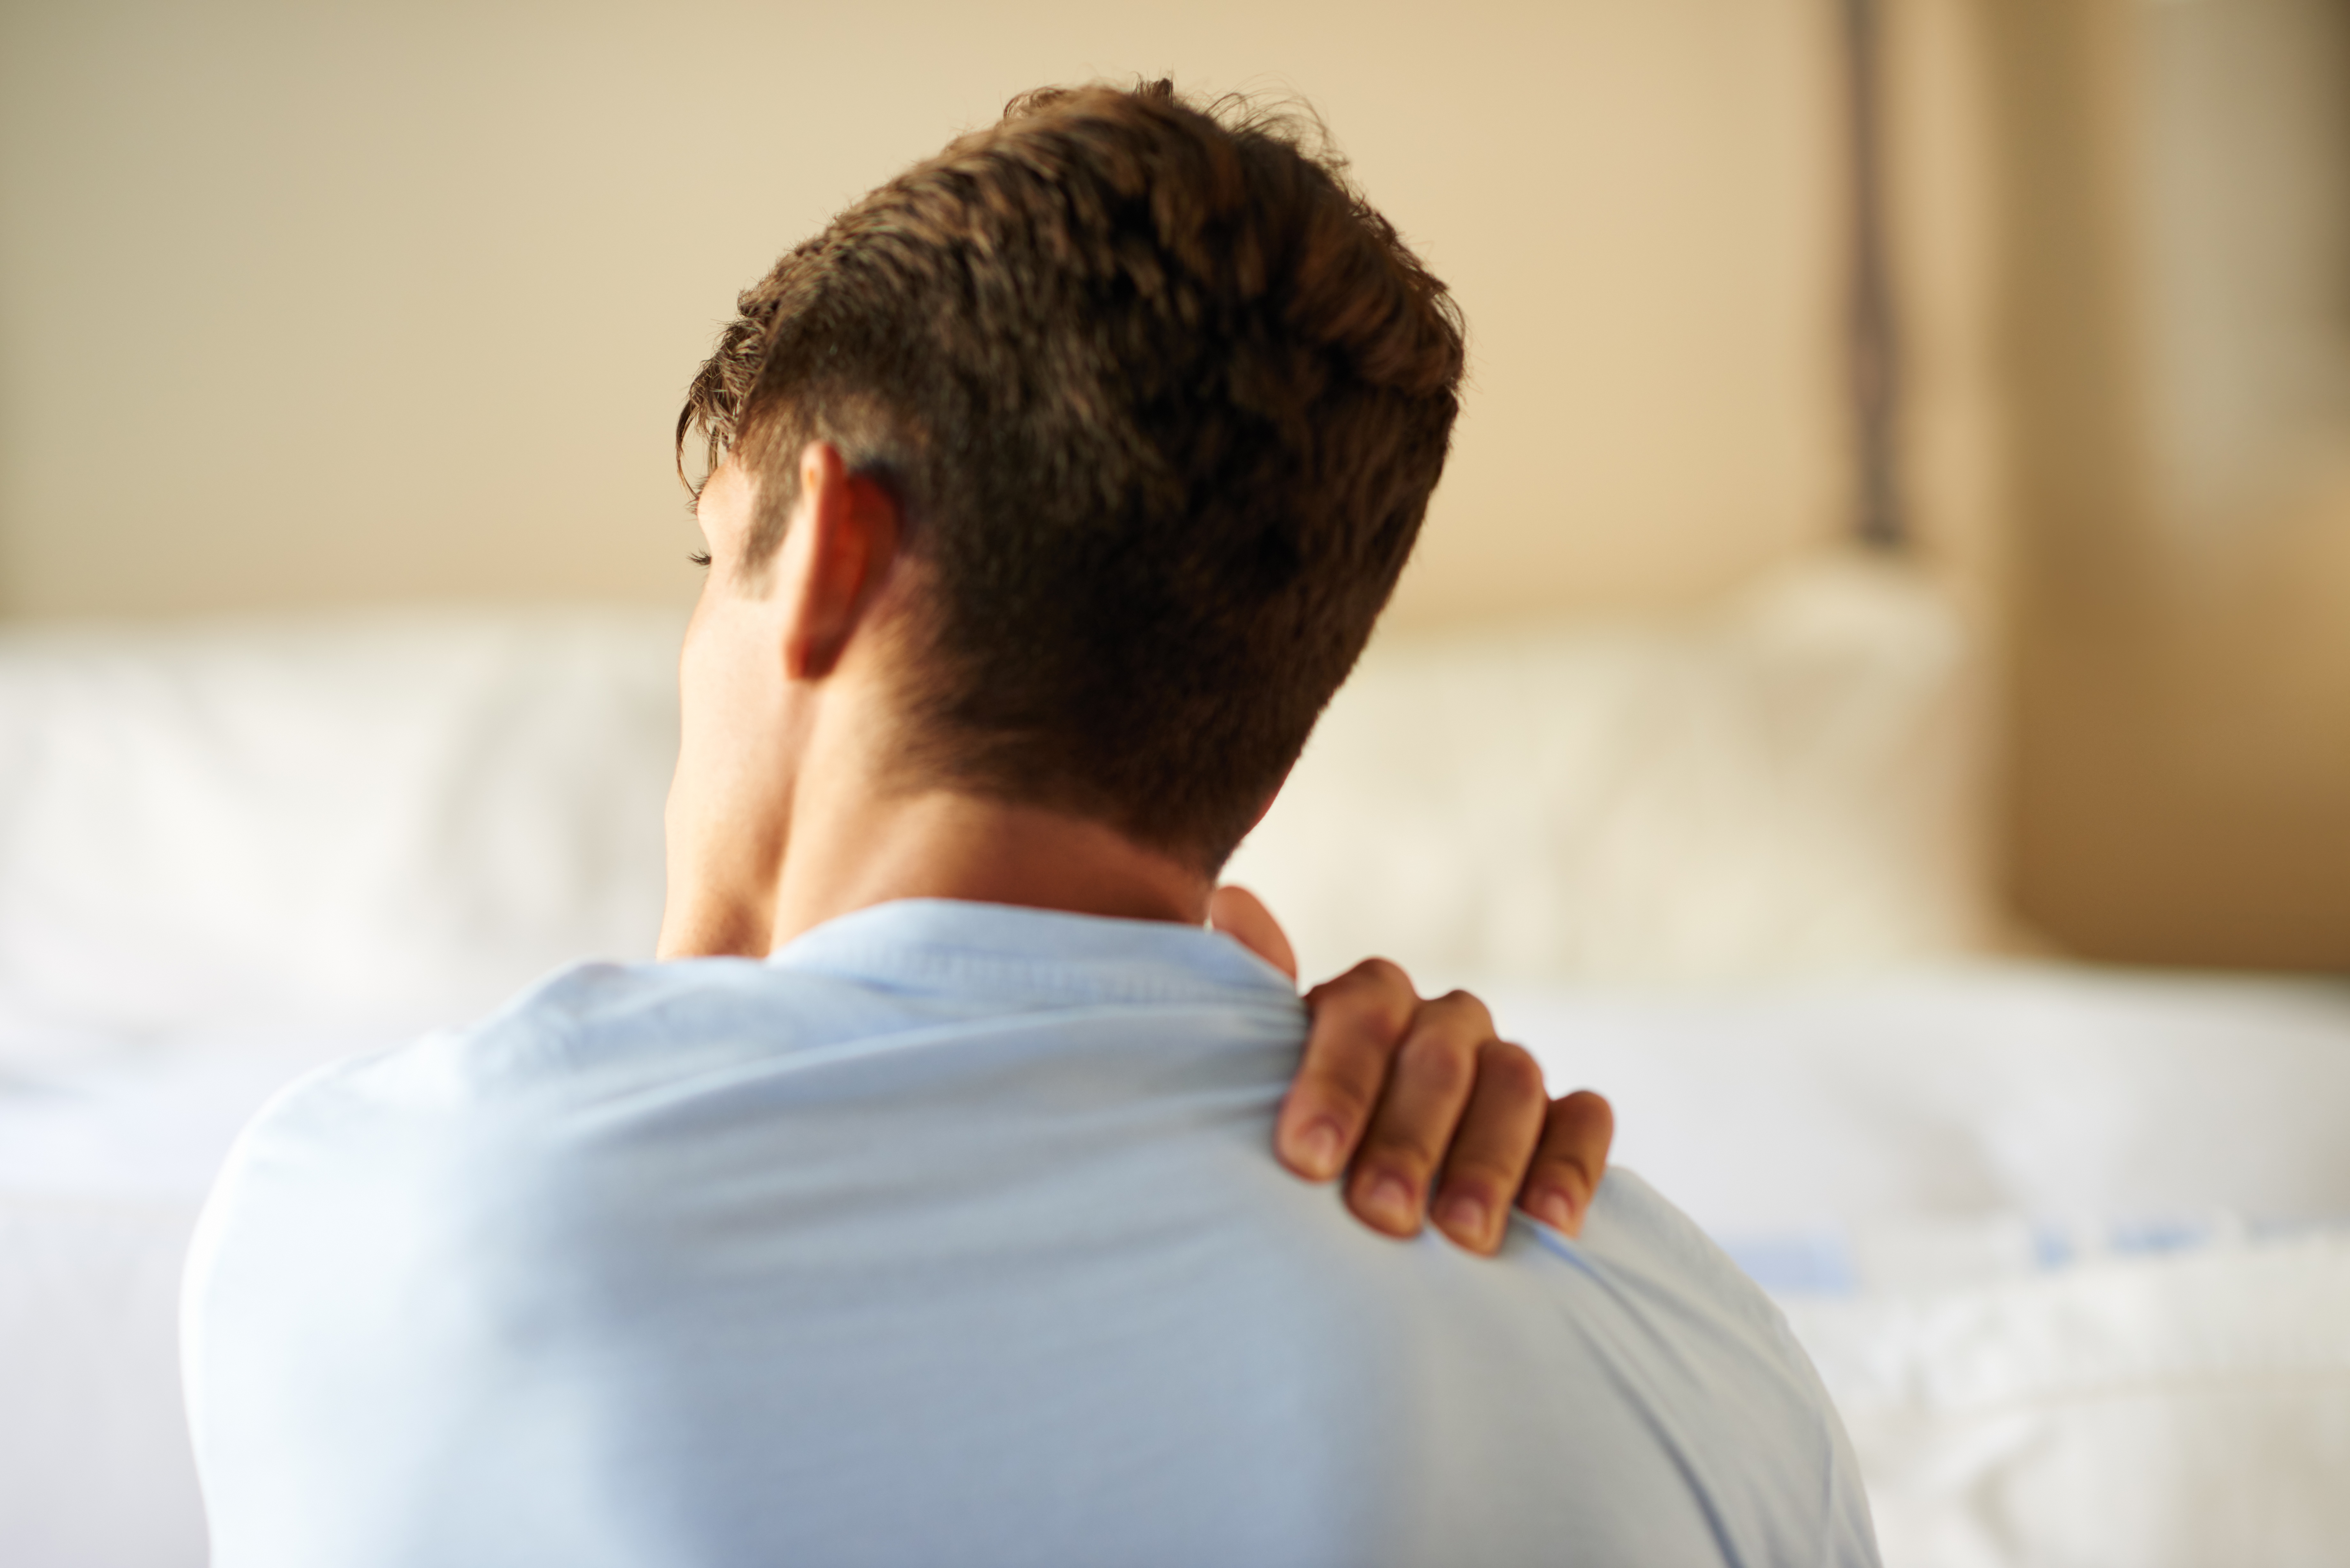 Shoulder Pain From Sleeping: Causes and How to Relieve It